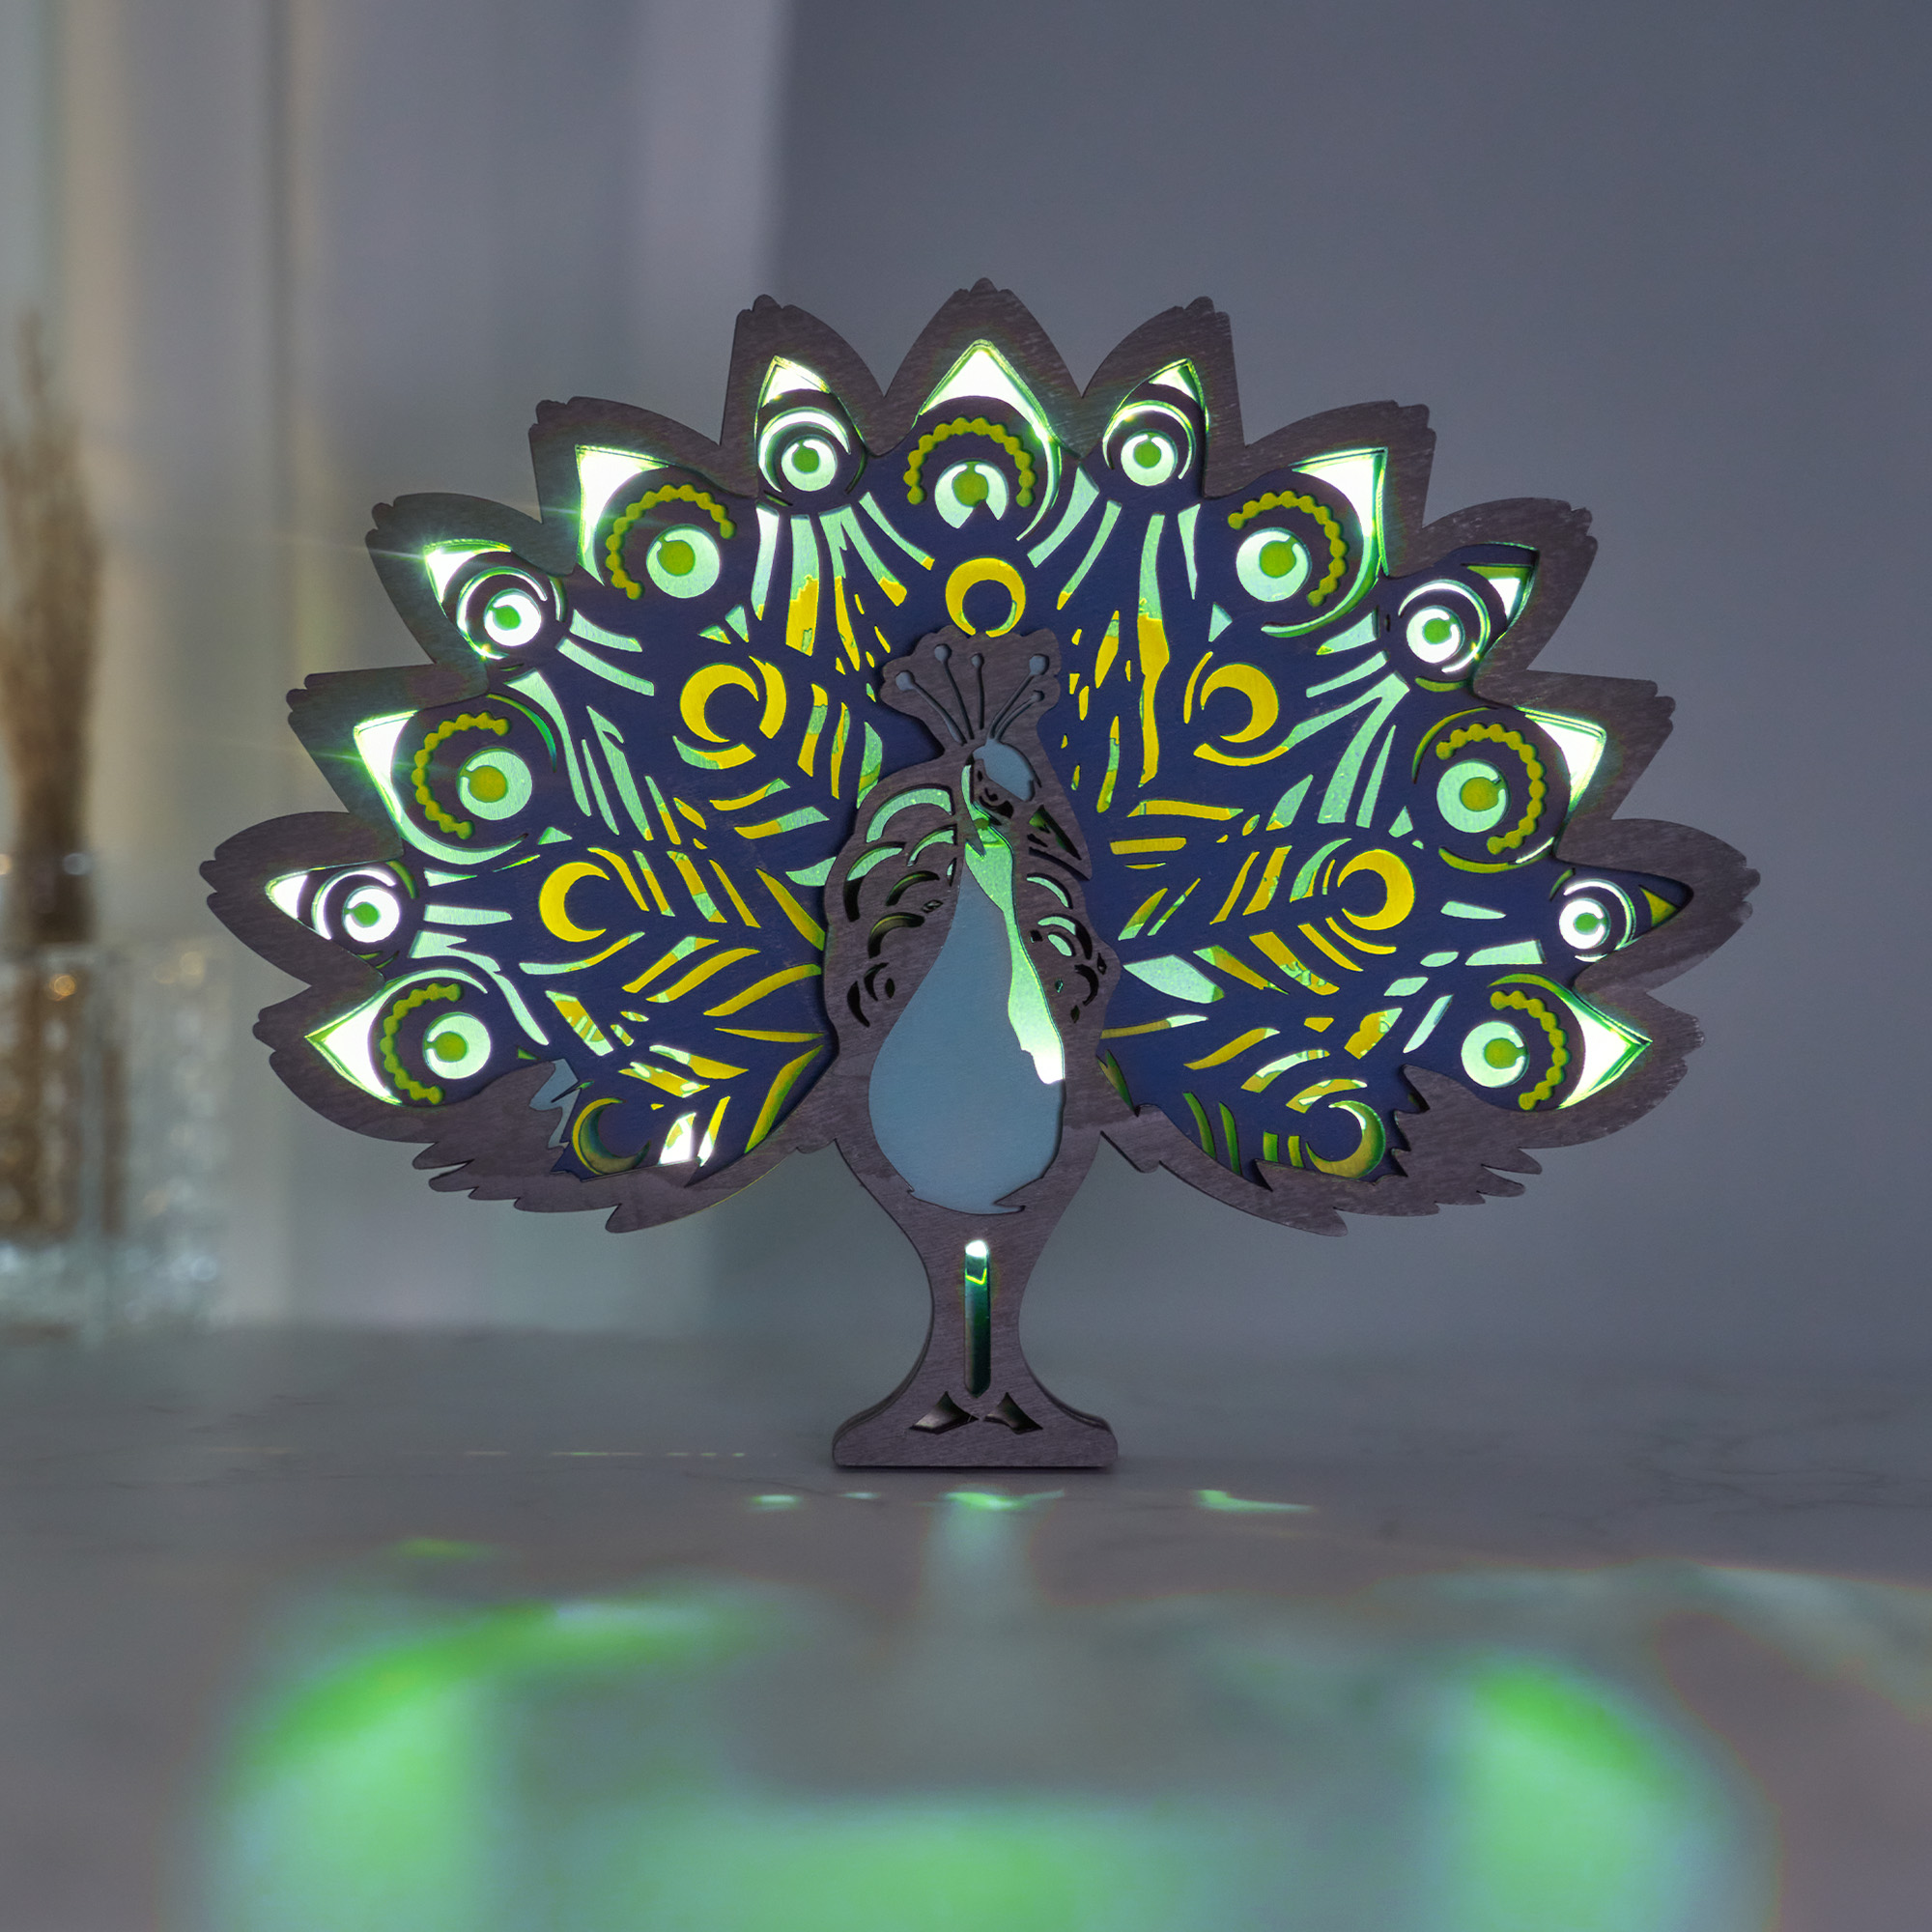 HOT SALE🔥-Peacock Wooden Carving Gift